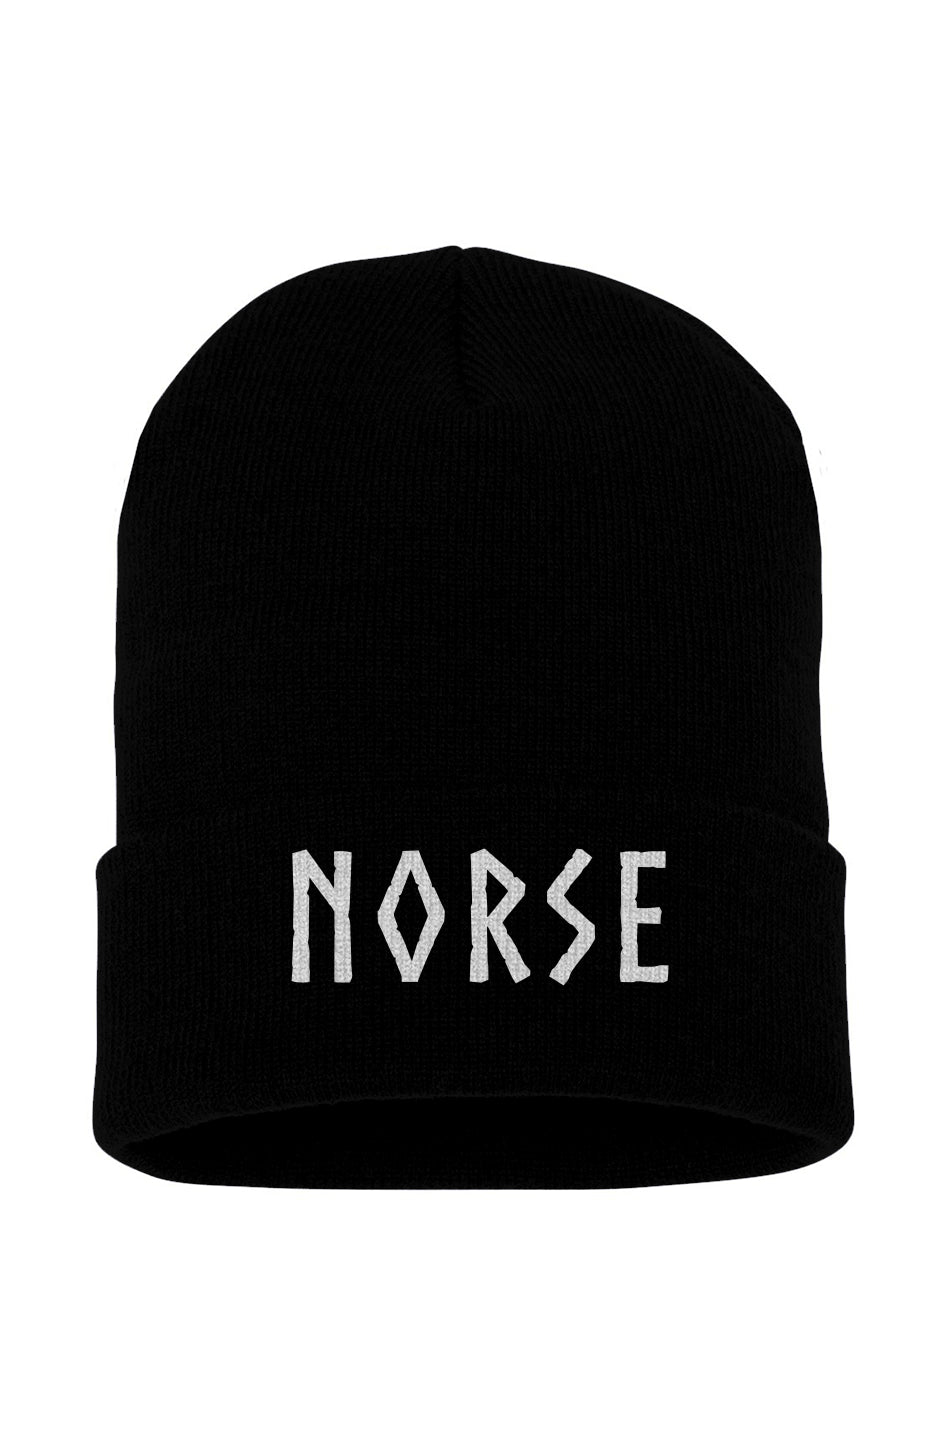 Embroidered Cuffed Beanie Black | Norse Hockey Letters